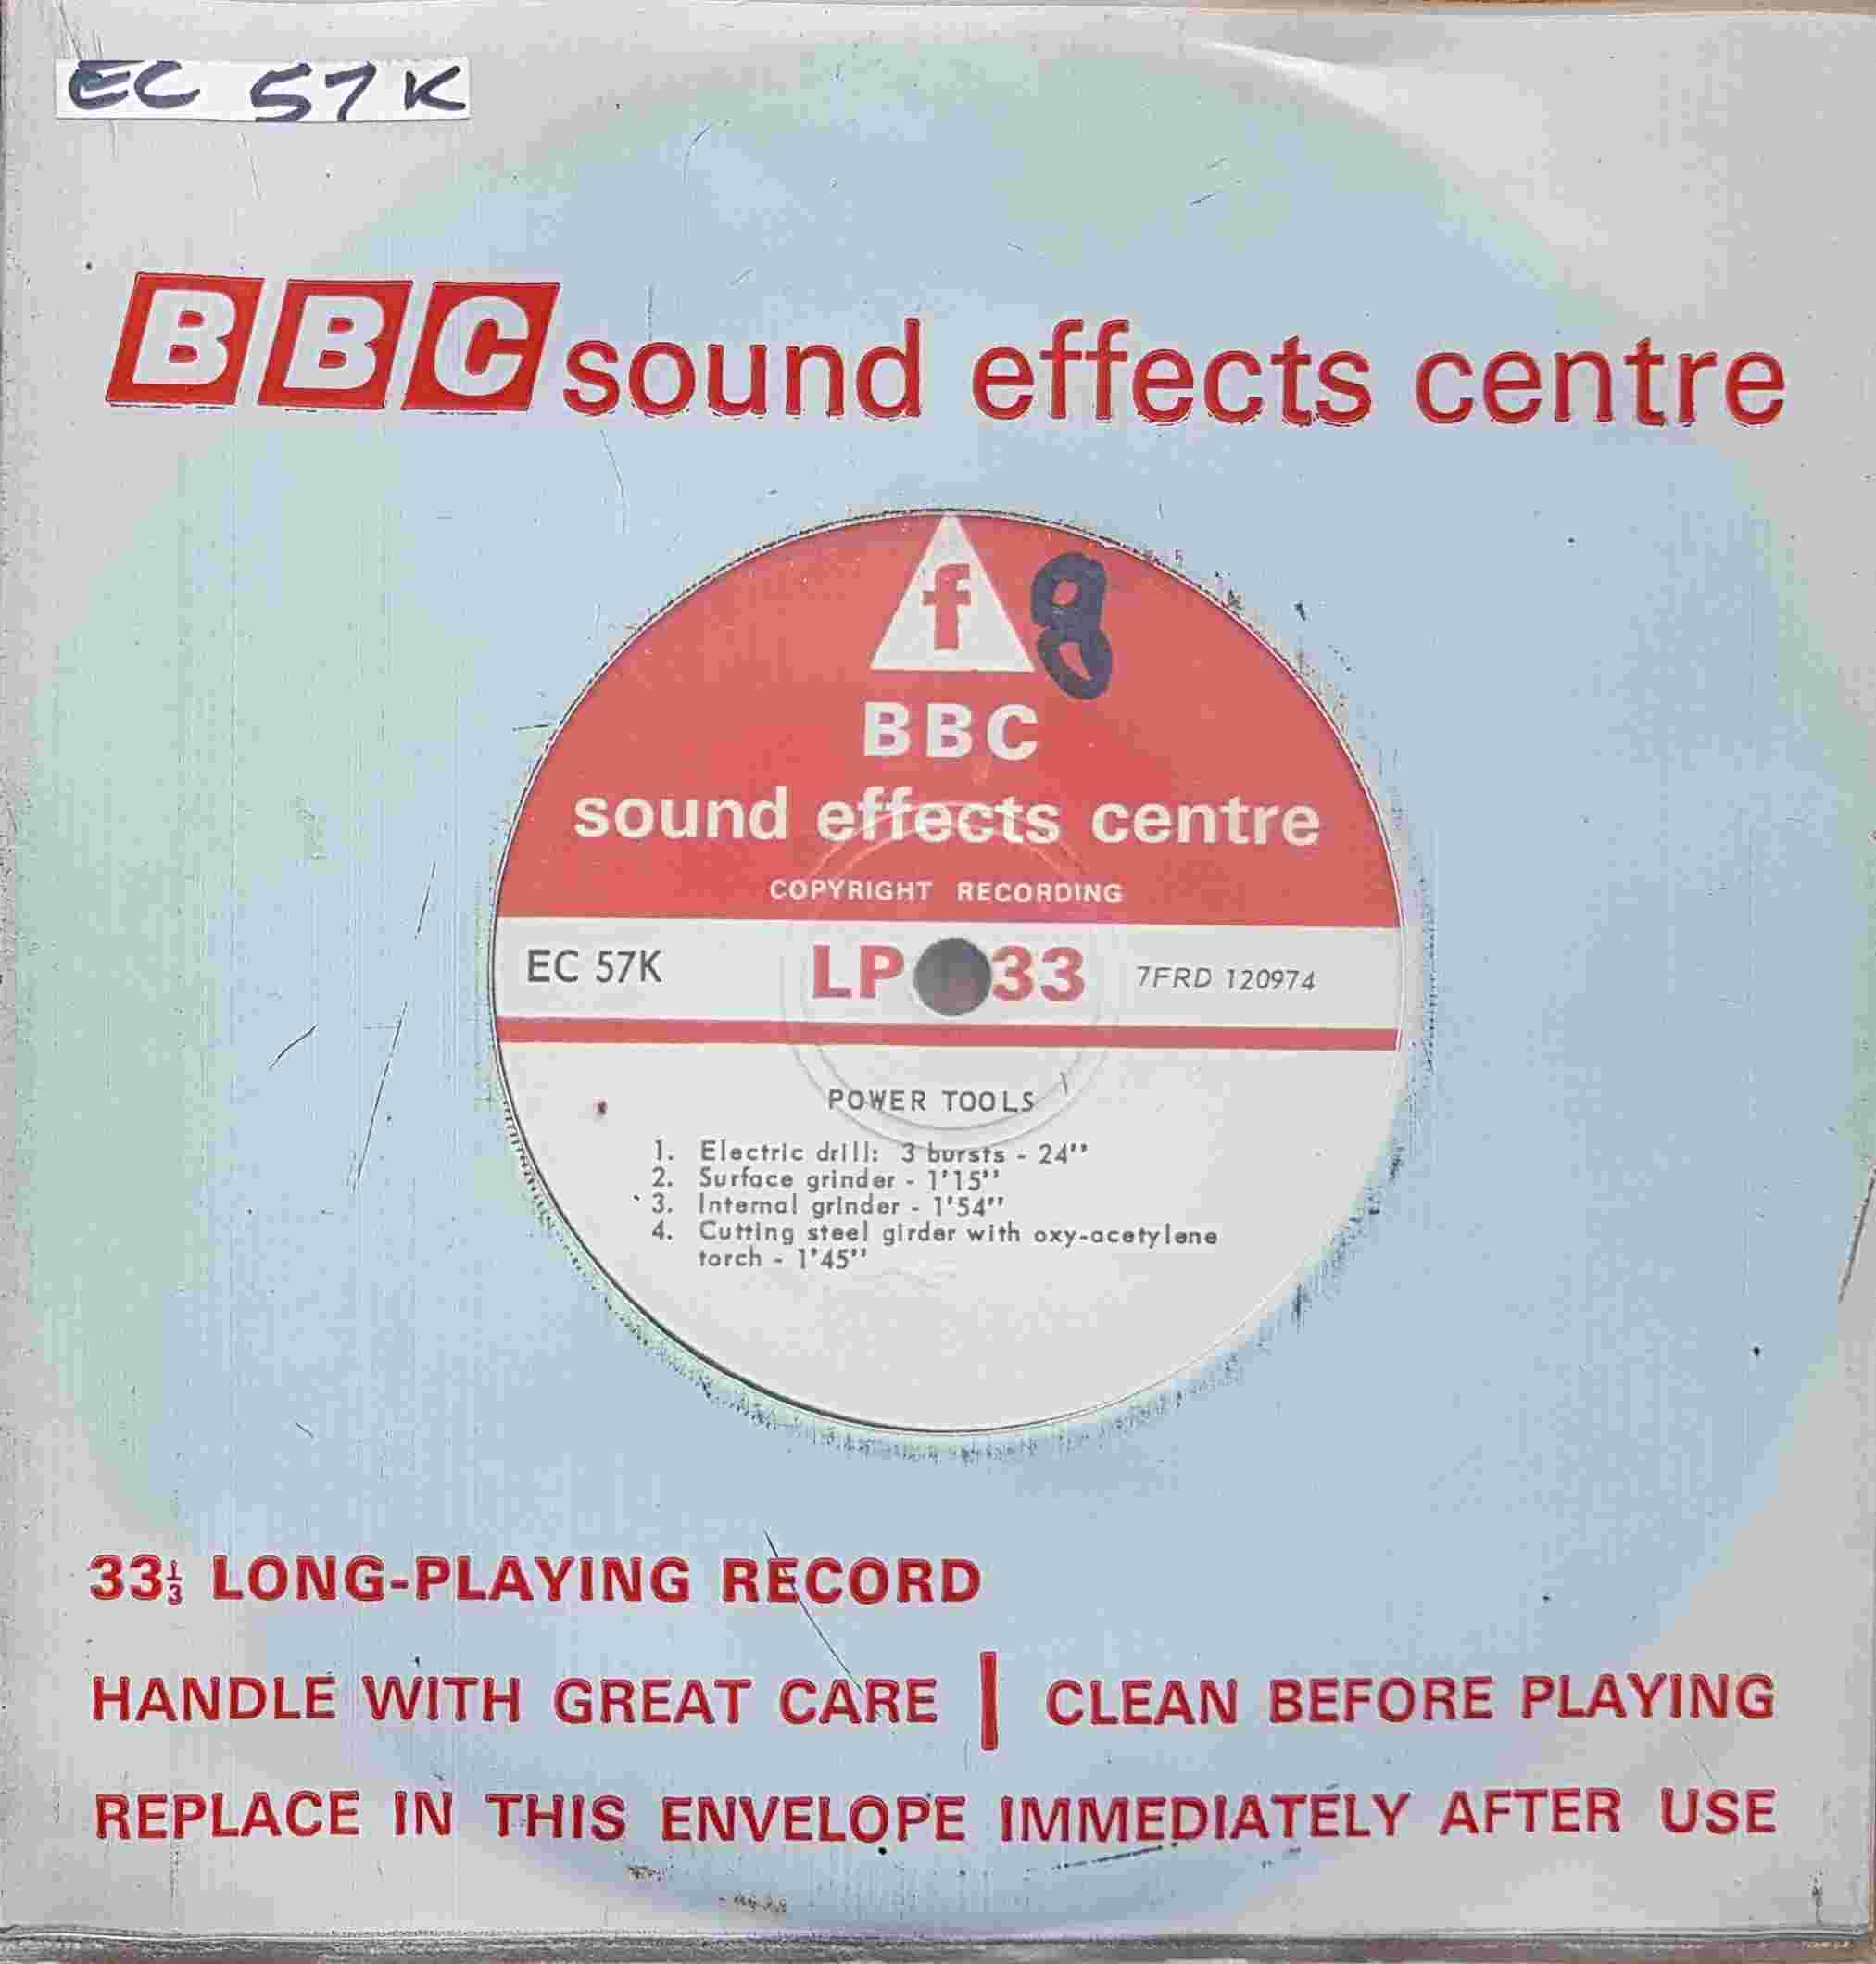 Picture of EC 57K Power tools / Industry by artist Not registered from the BBC records and Tapes library